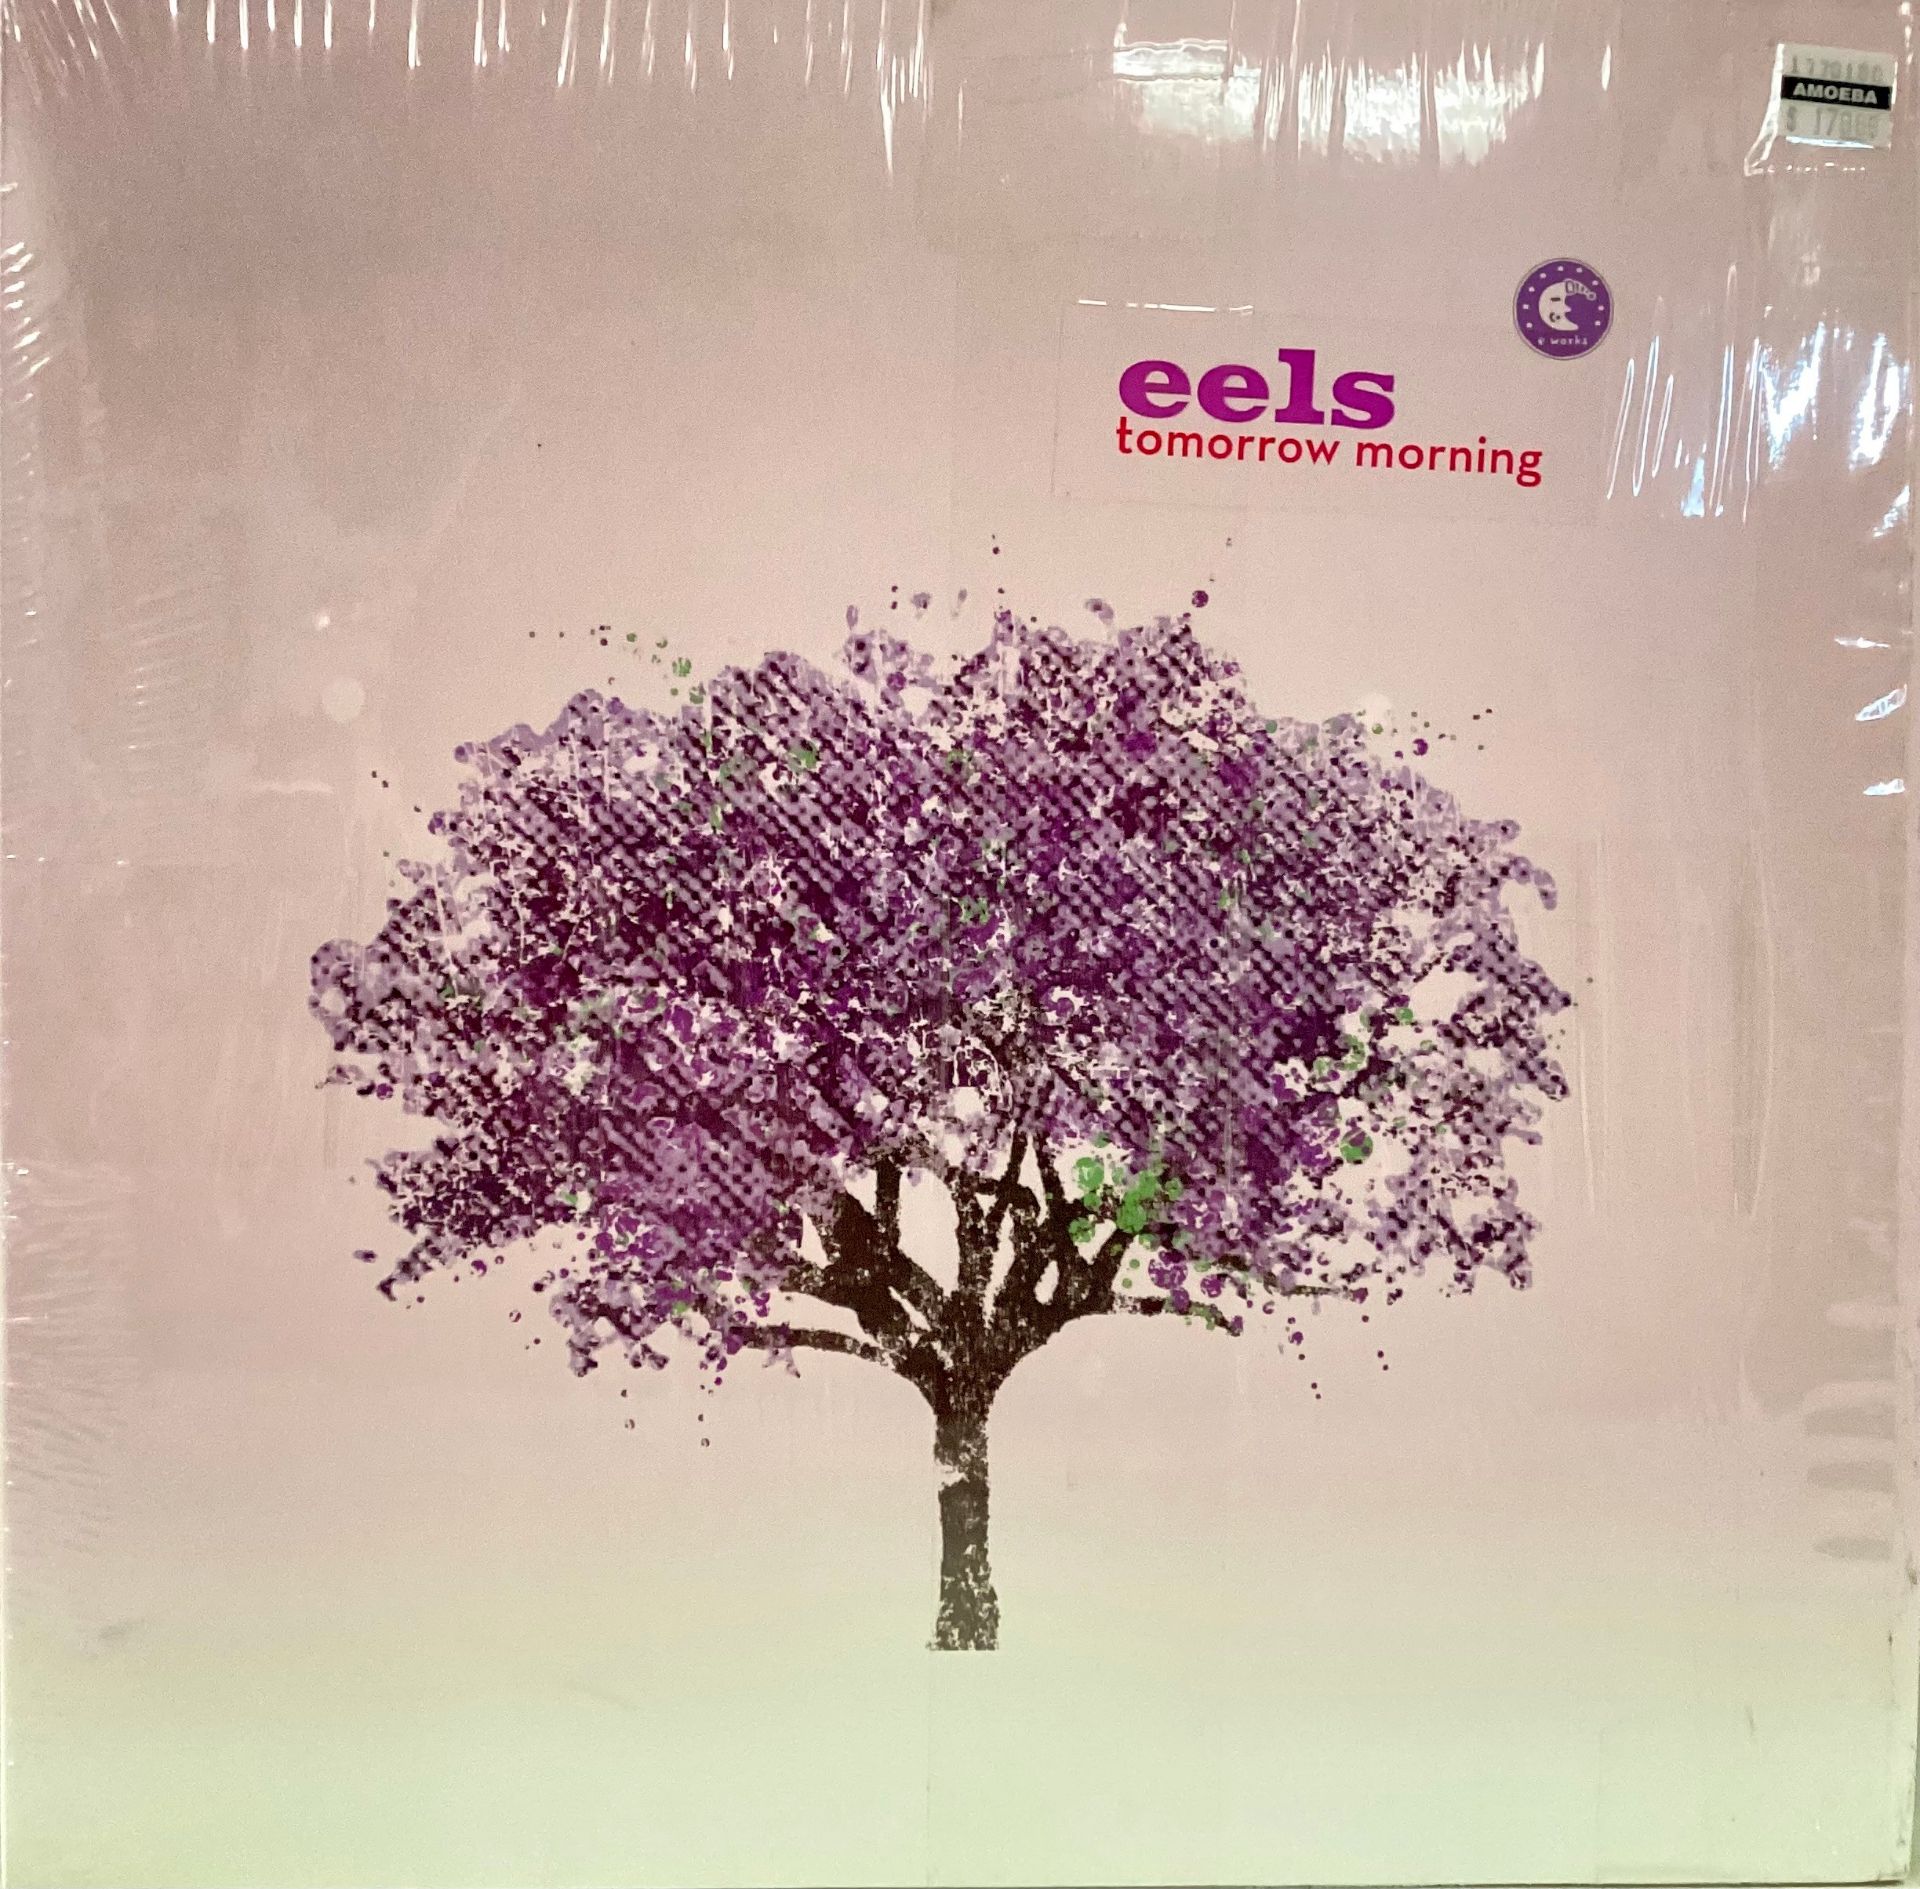 EELS - TOMORROW MORNING VINYL LP & 7" EP. Album found here on Works Records from 2010 complete